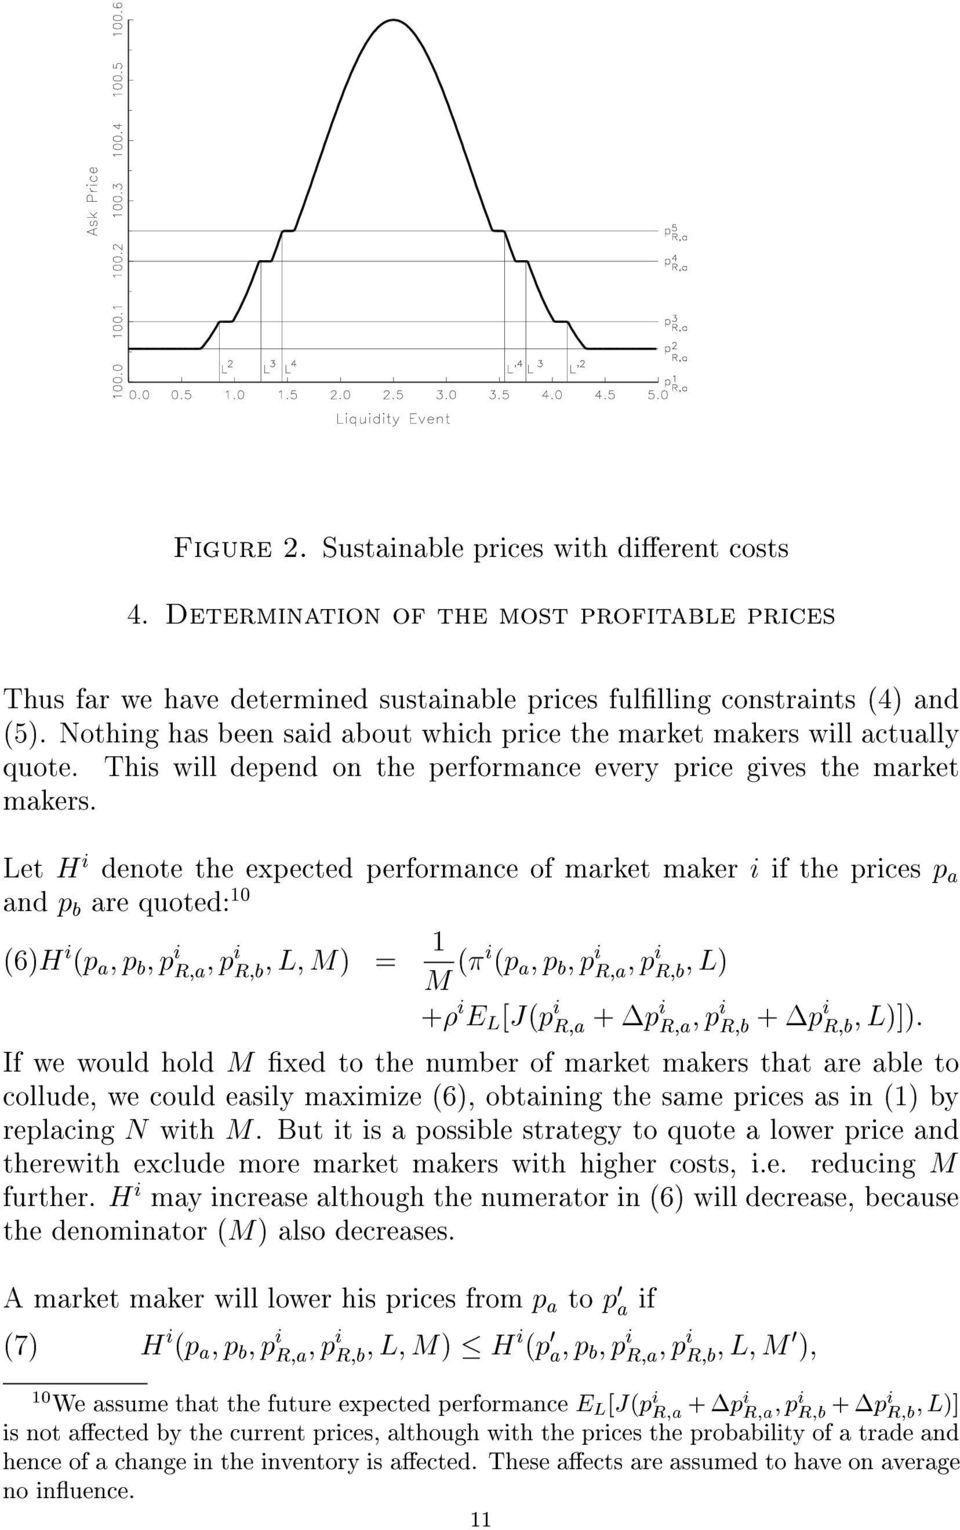 Let H i denote the expected performance of market maker i if the prices p a and p b are quoted: 10 (6)H i (p a ;p b ;p i R;a ;pi R;b ;L;M) = 1 M (i (p a ;p b ;p i R;a ;pi R;b ;L) + i E L [J(p i R;a